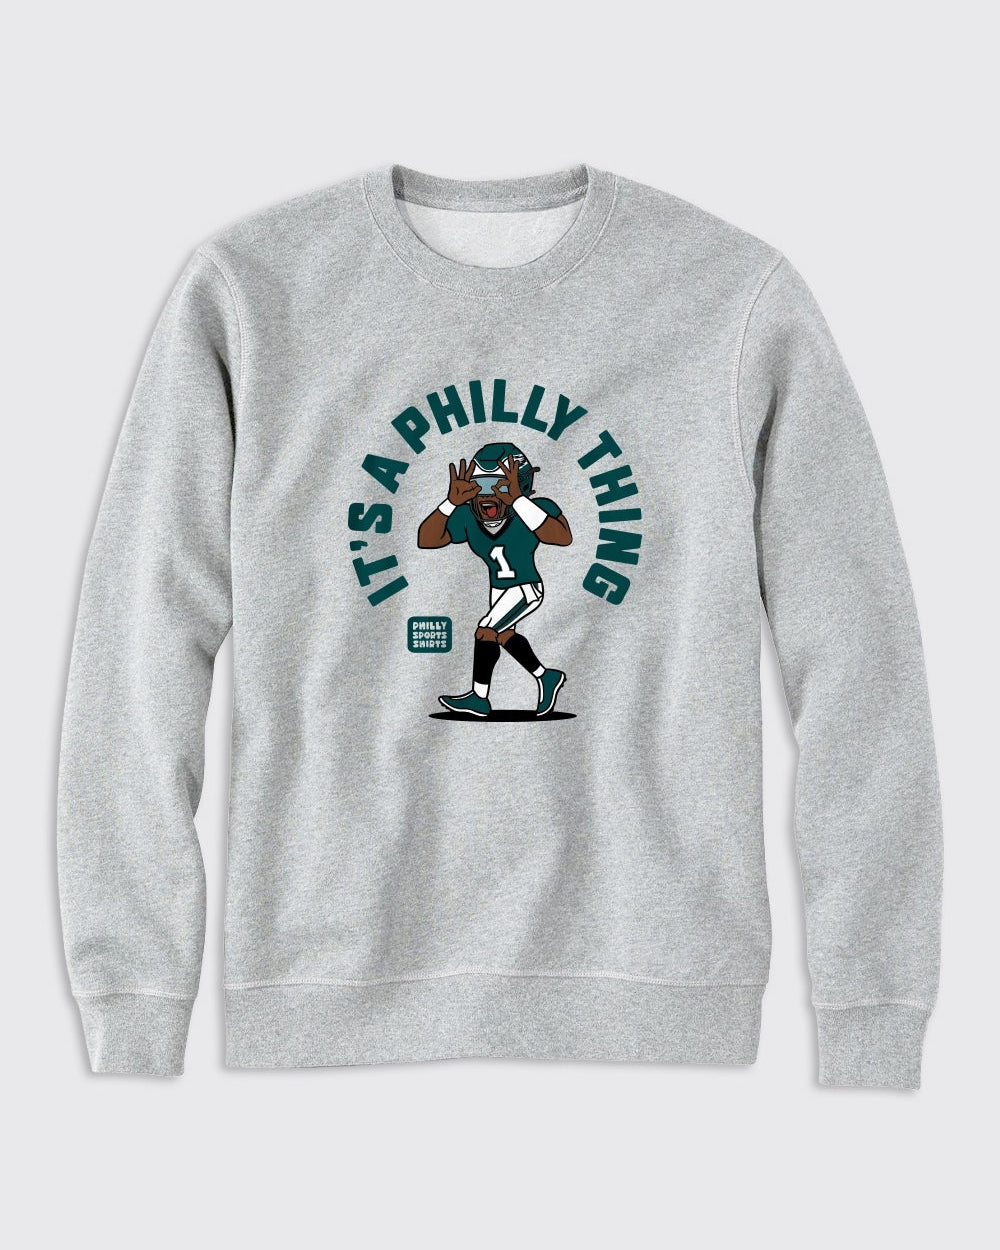 Philadelphia Eagles-It's A Philly Thing Crewneck Sweatshirt-Grey Heather-Philly Sports Shirts